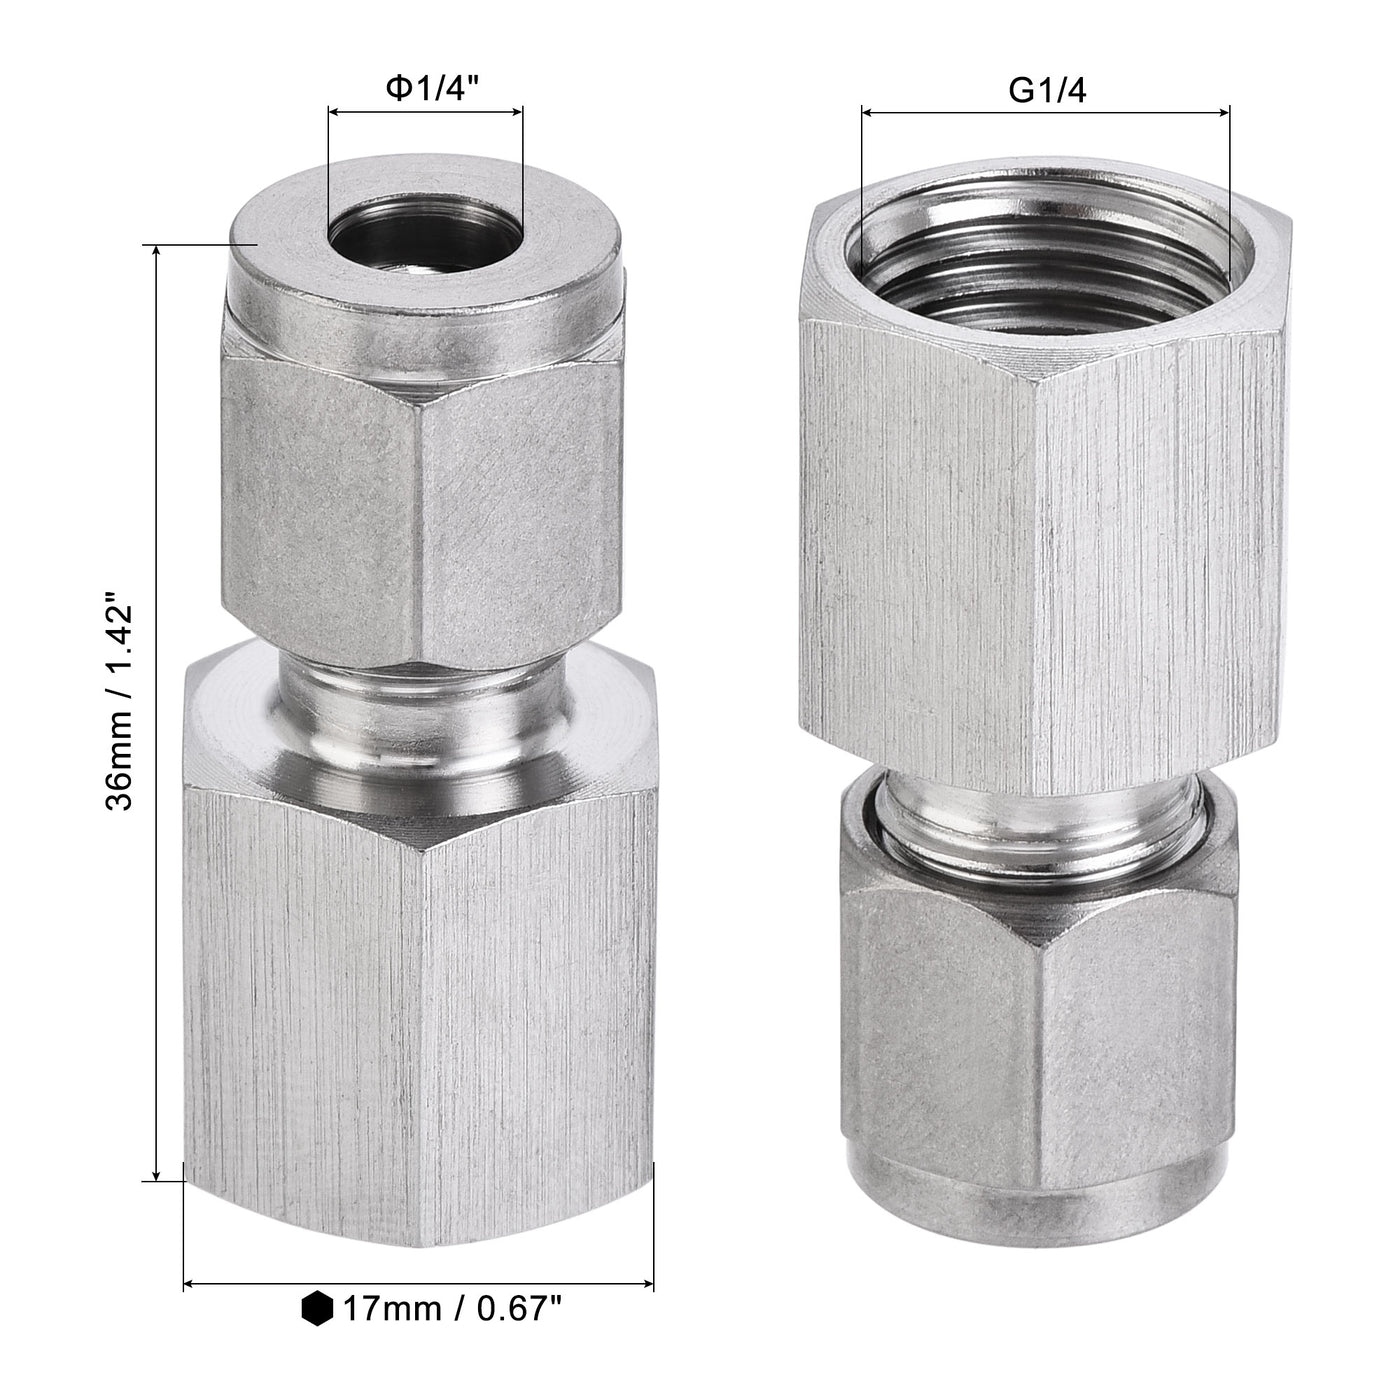 Uxcell Uxcell Compression Tube Fitting G1/2 Female Thread x 1/2" Tube OD Straight Coupling Adapter 304 Stainless Steel